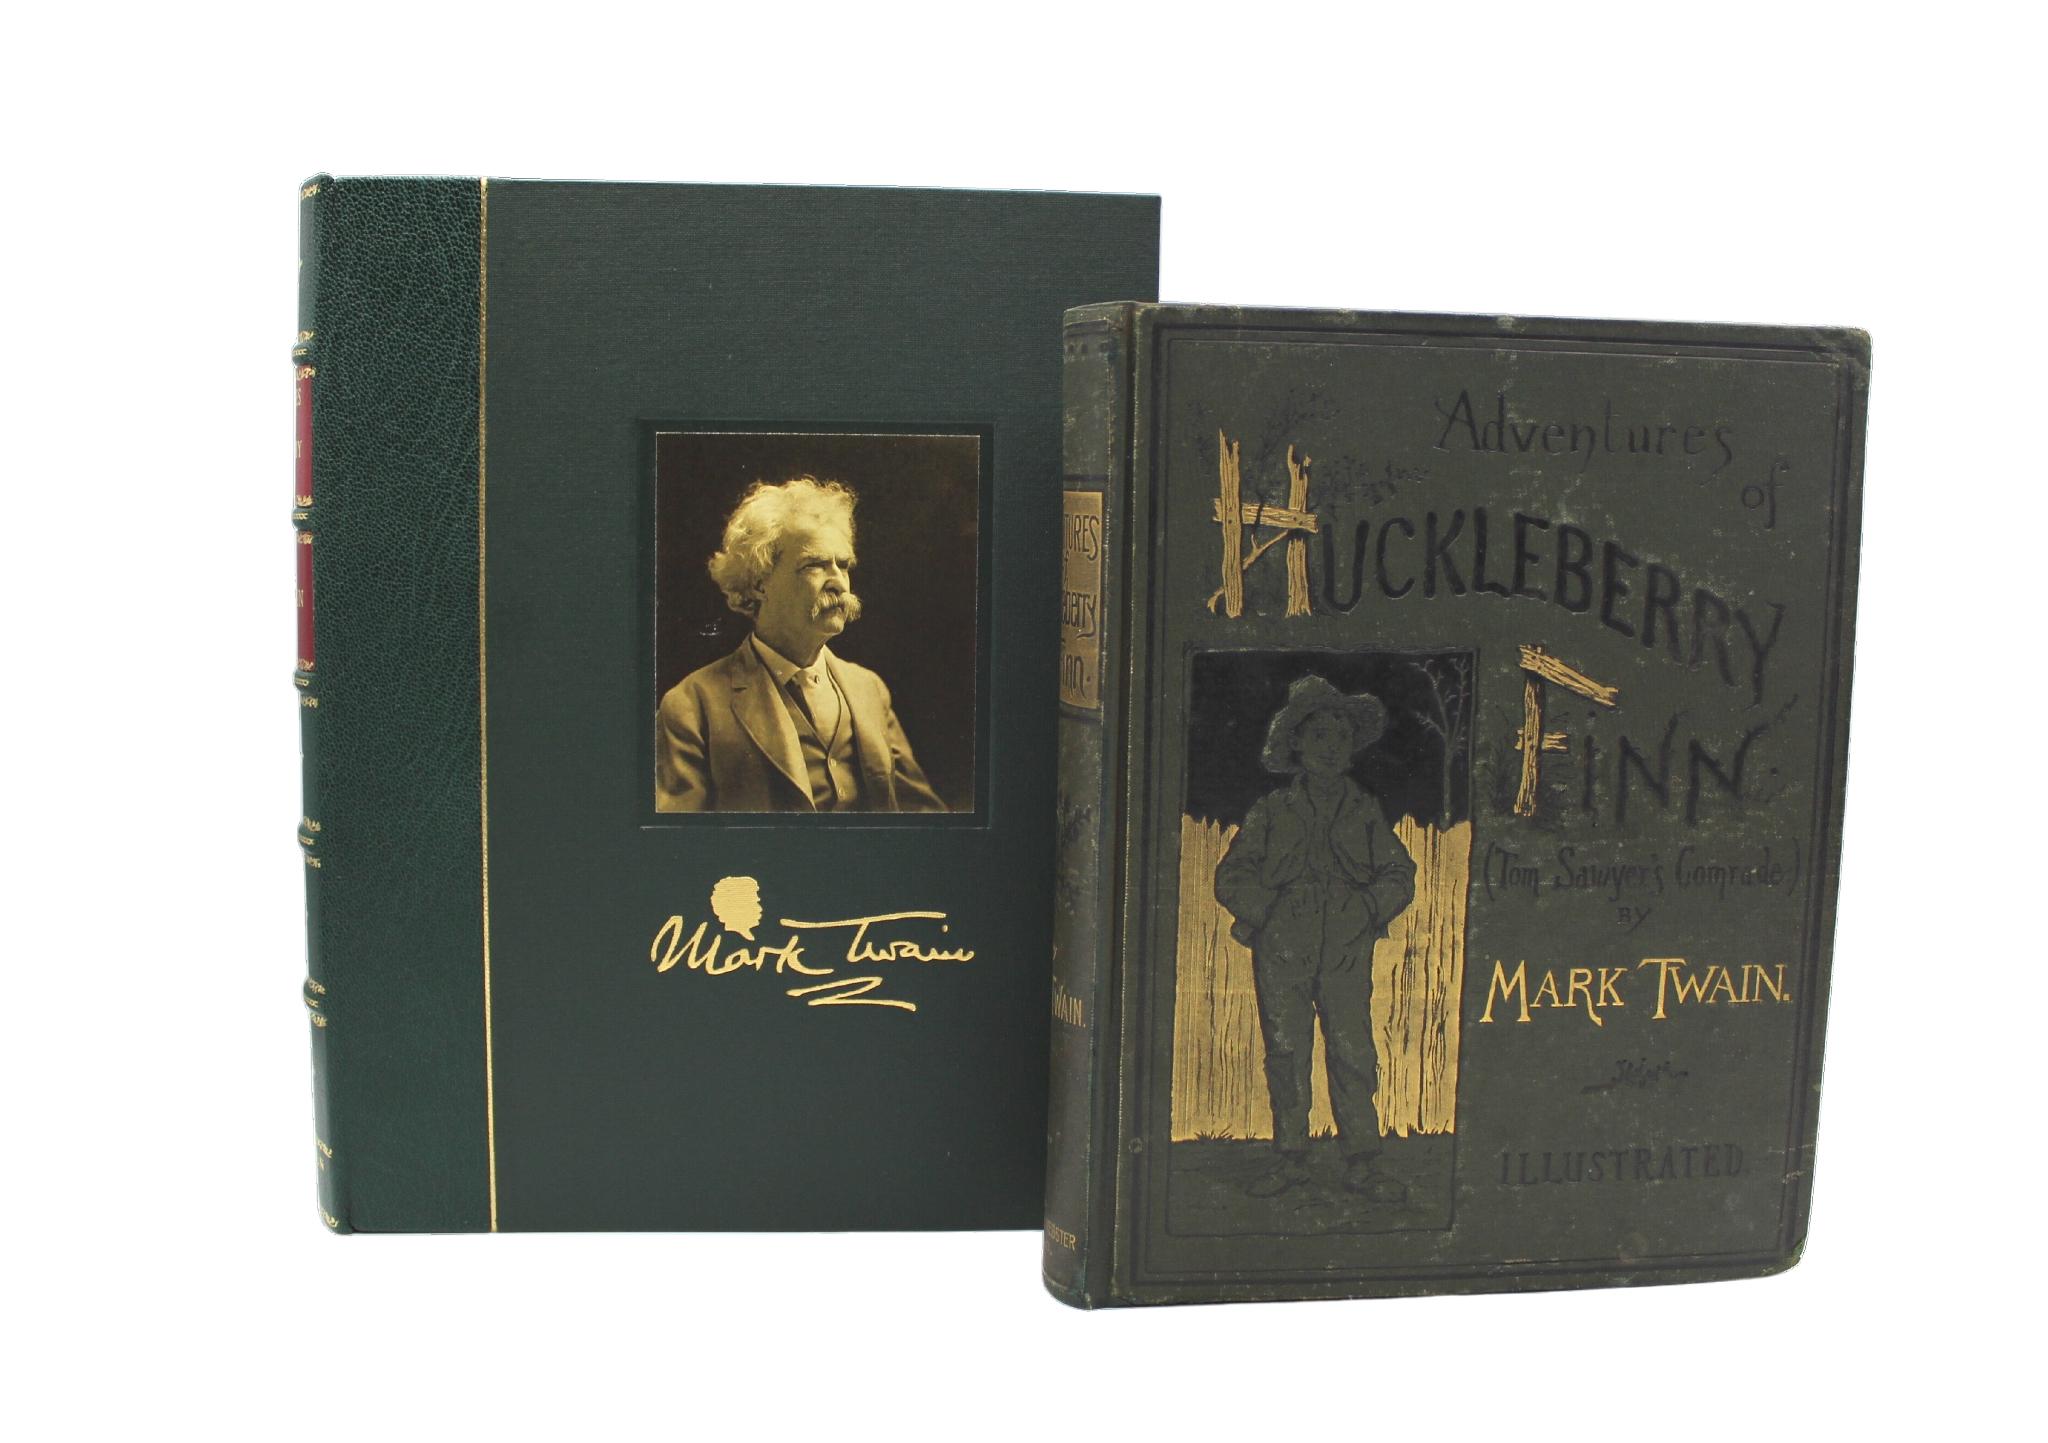 Paper Adventures of Huckleberry Finn by Mark Twain, First American Edition, 1885